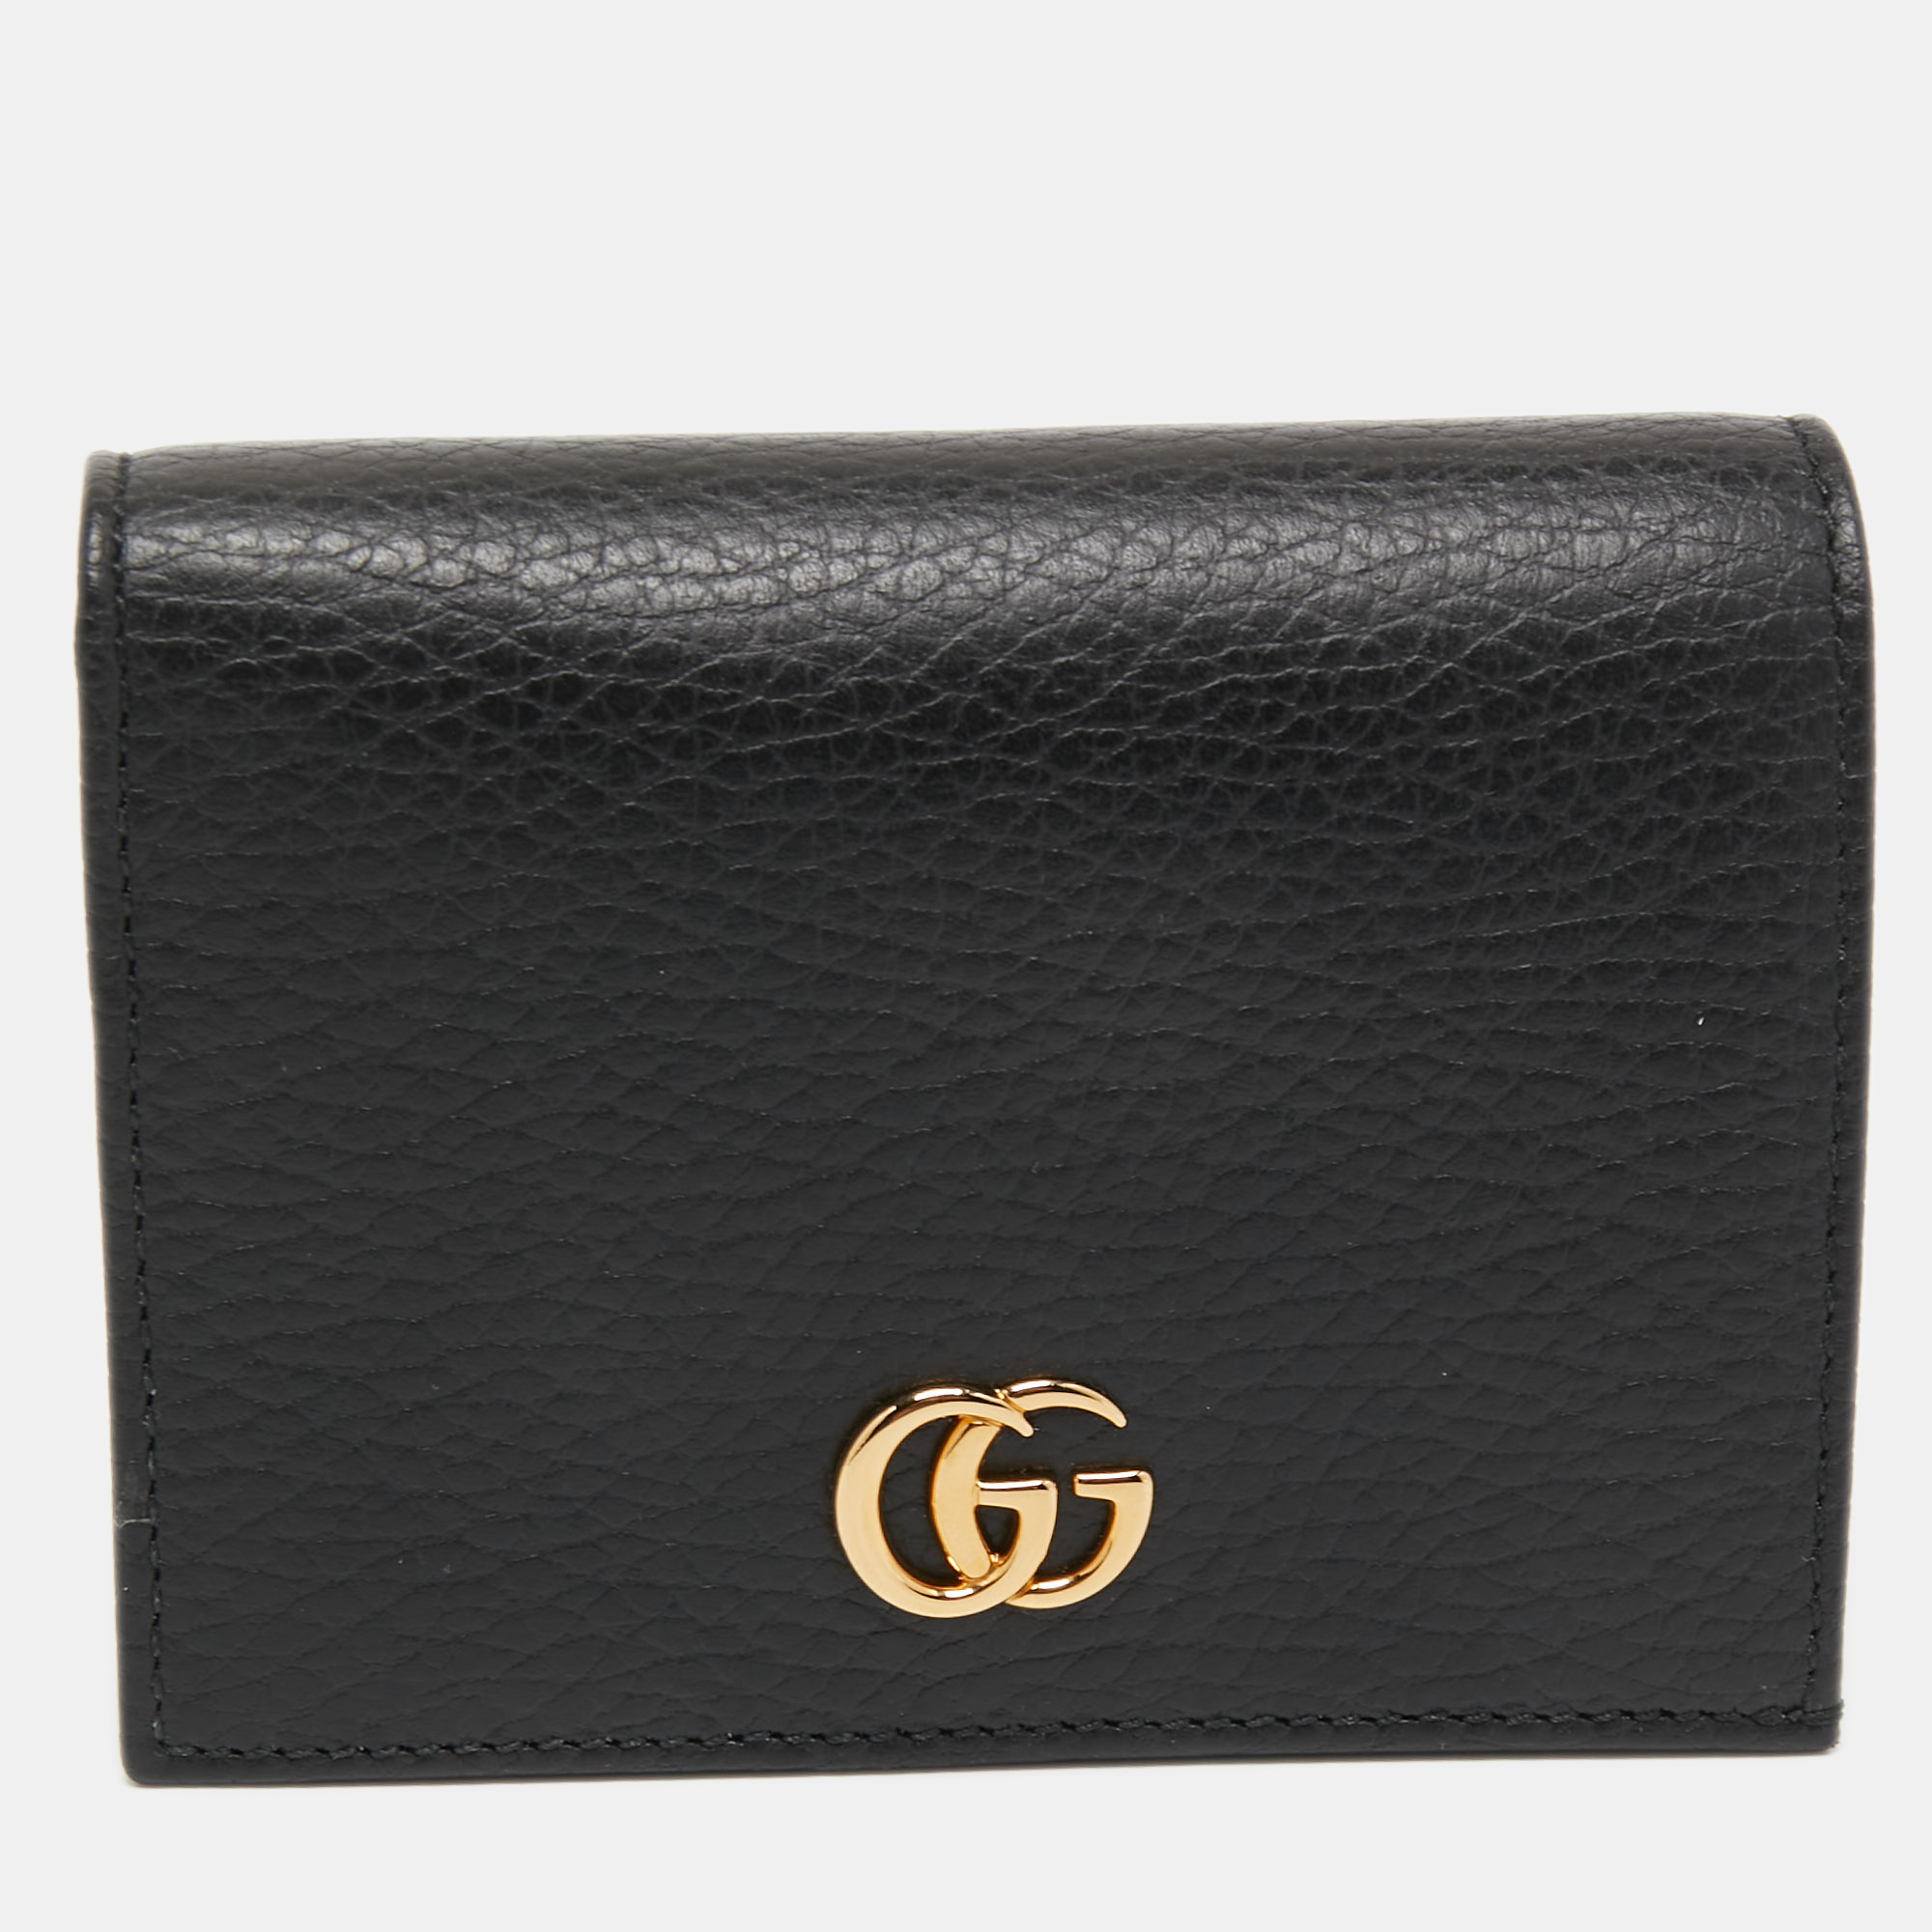 Pre-owned Gucci Black Leather Gg Marmont Flap Card Case